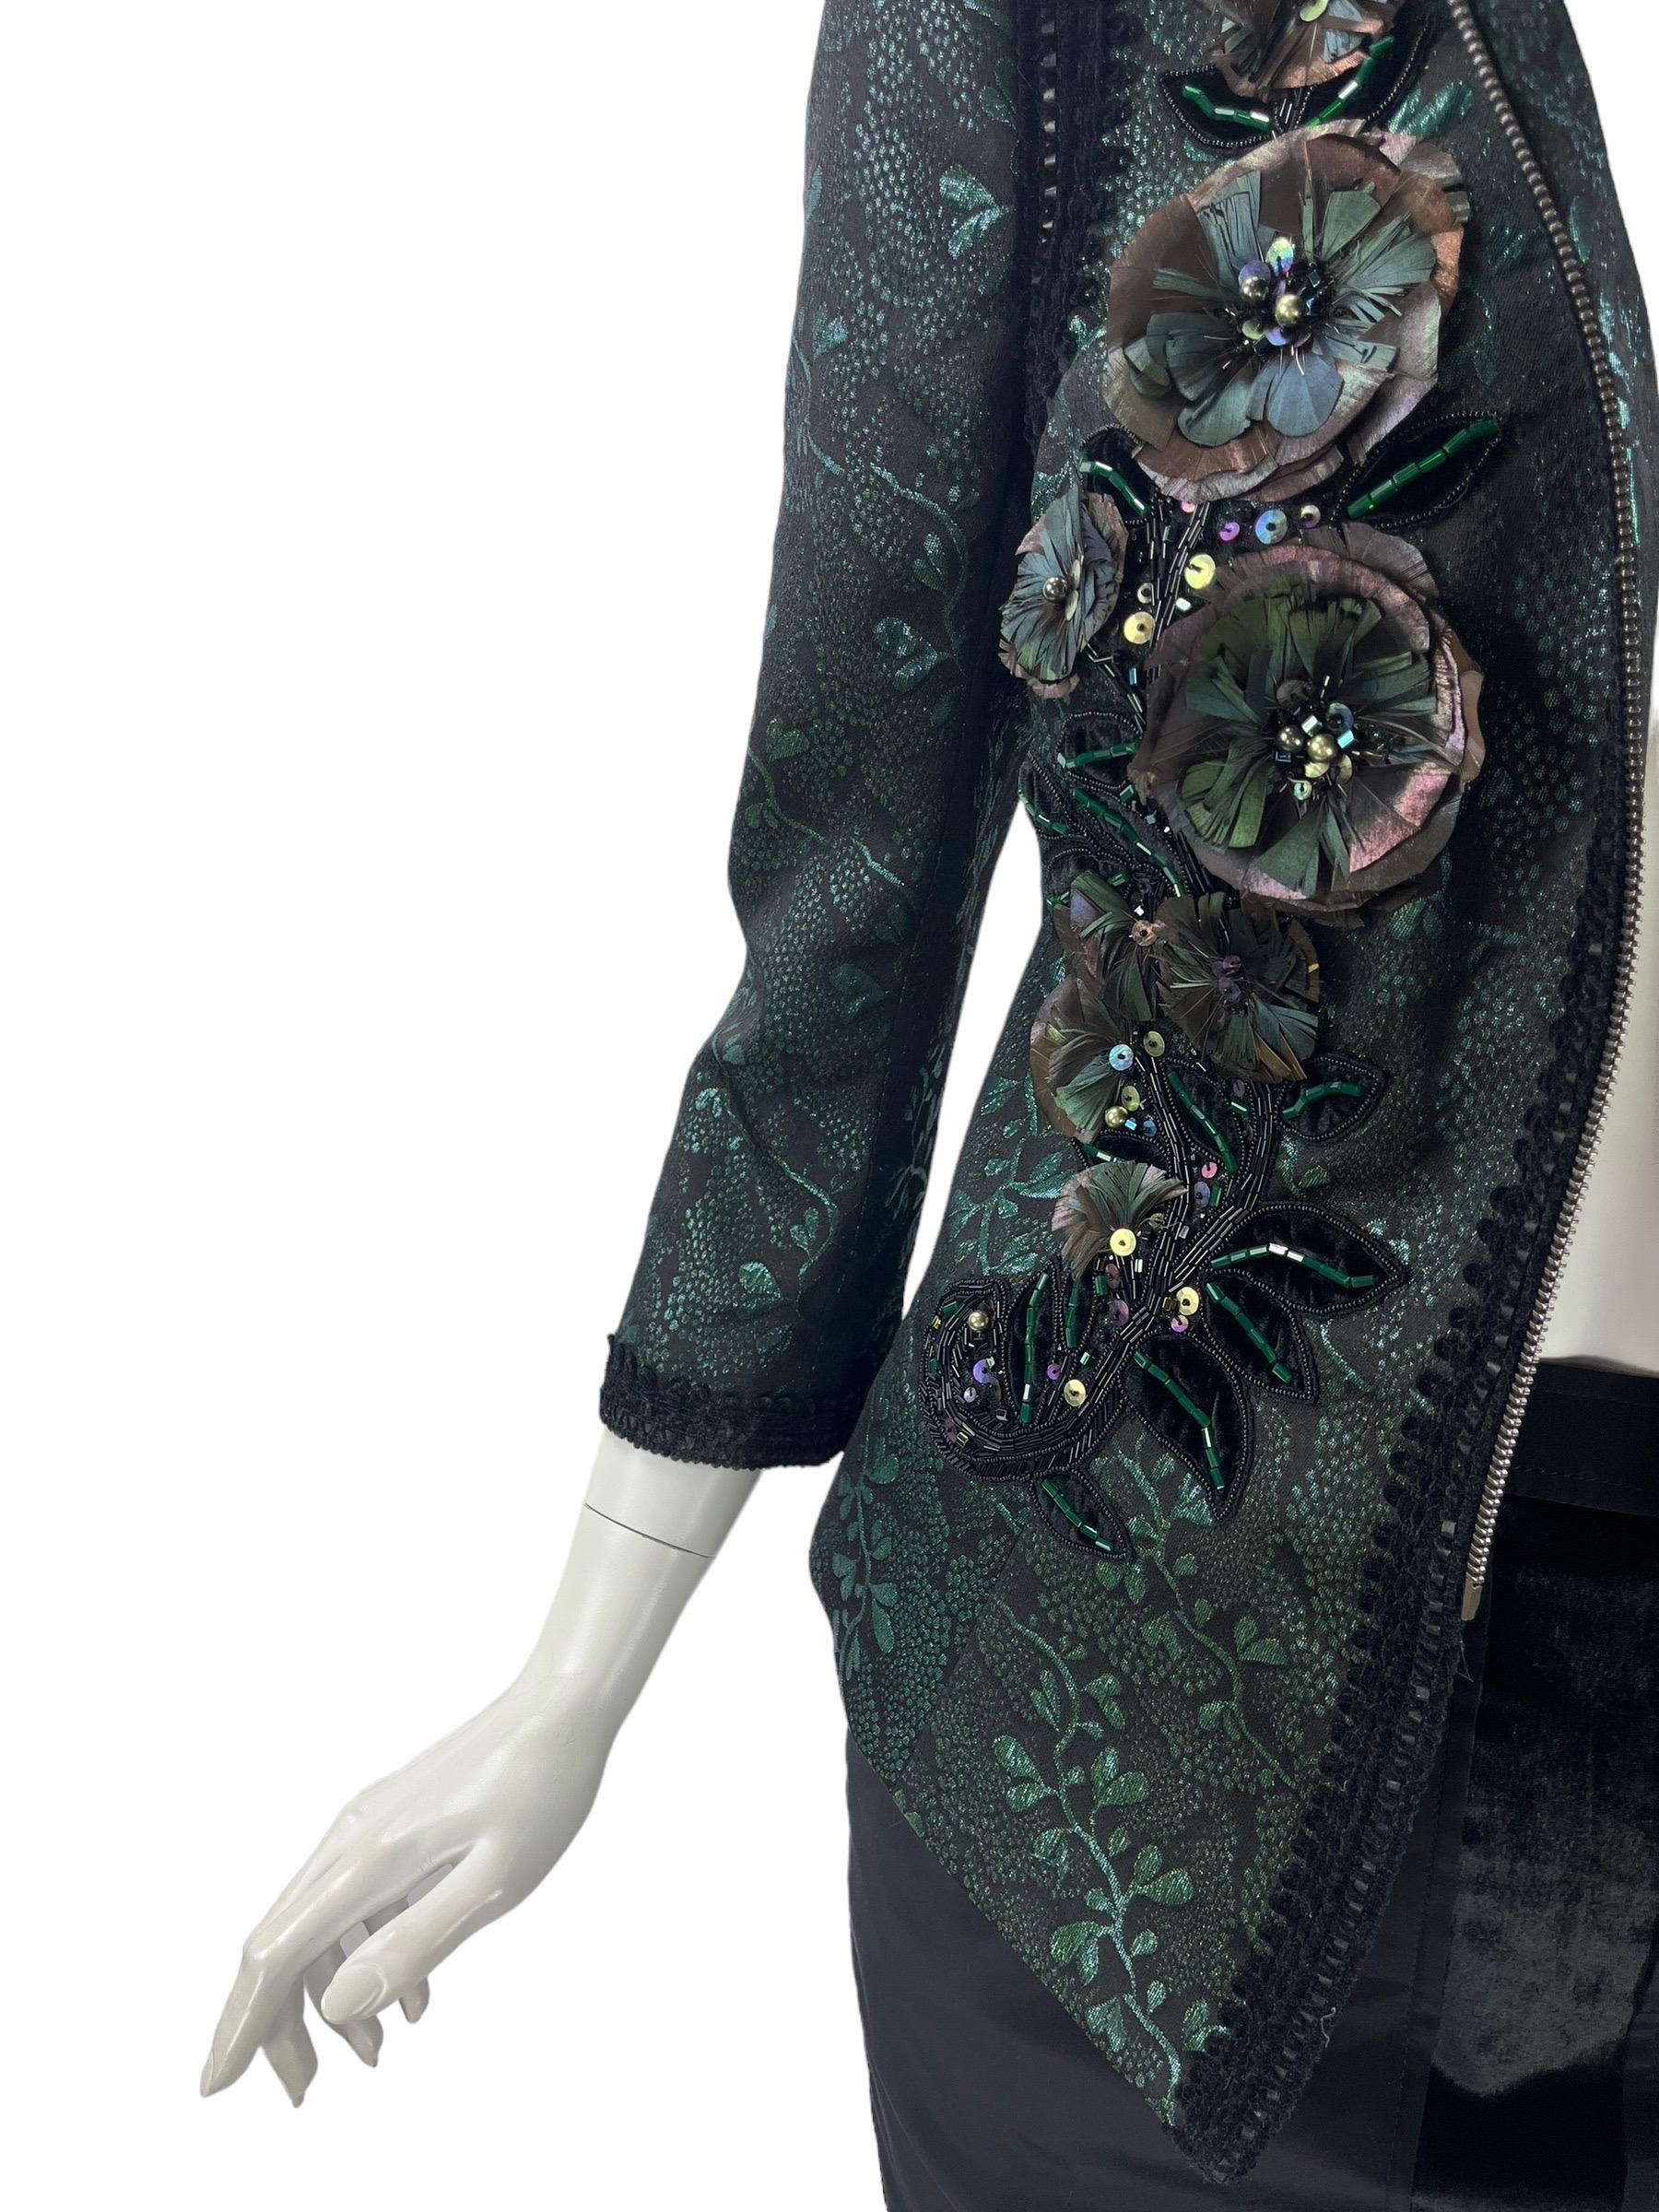 Andrew Gn Beaded and Feather Embellished Emerald Green Evening Blazer
French size 44 -  US 10/12
Velvet and Leather trim, Iridescent finish.
49% PL, 15% AC, 17% WO
17% PC, 1% cock feather, 1% glass beads. Fully lined. Zipper closure. Fabric not